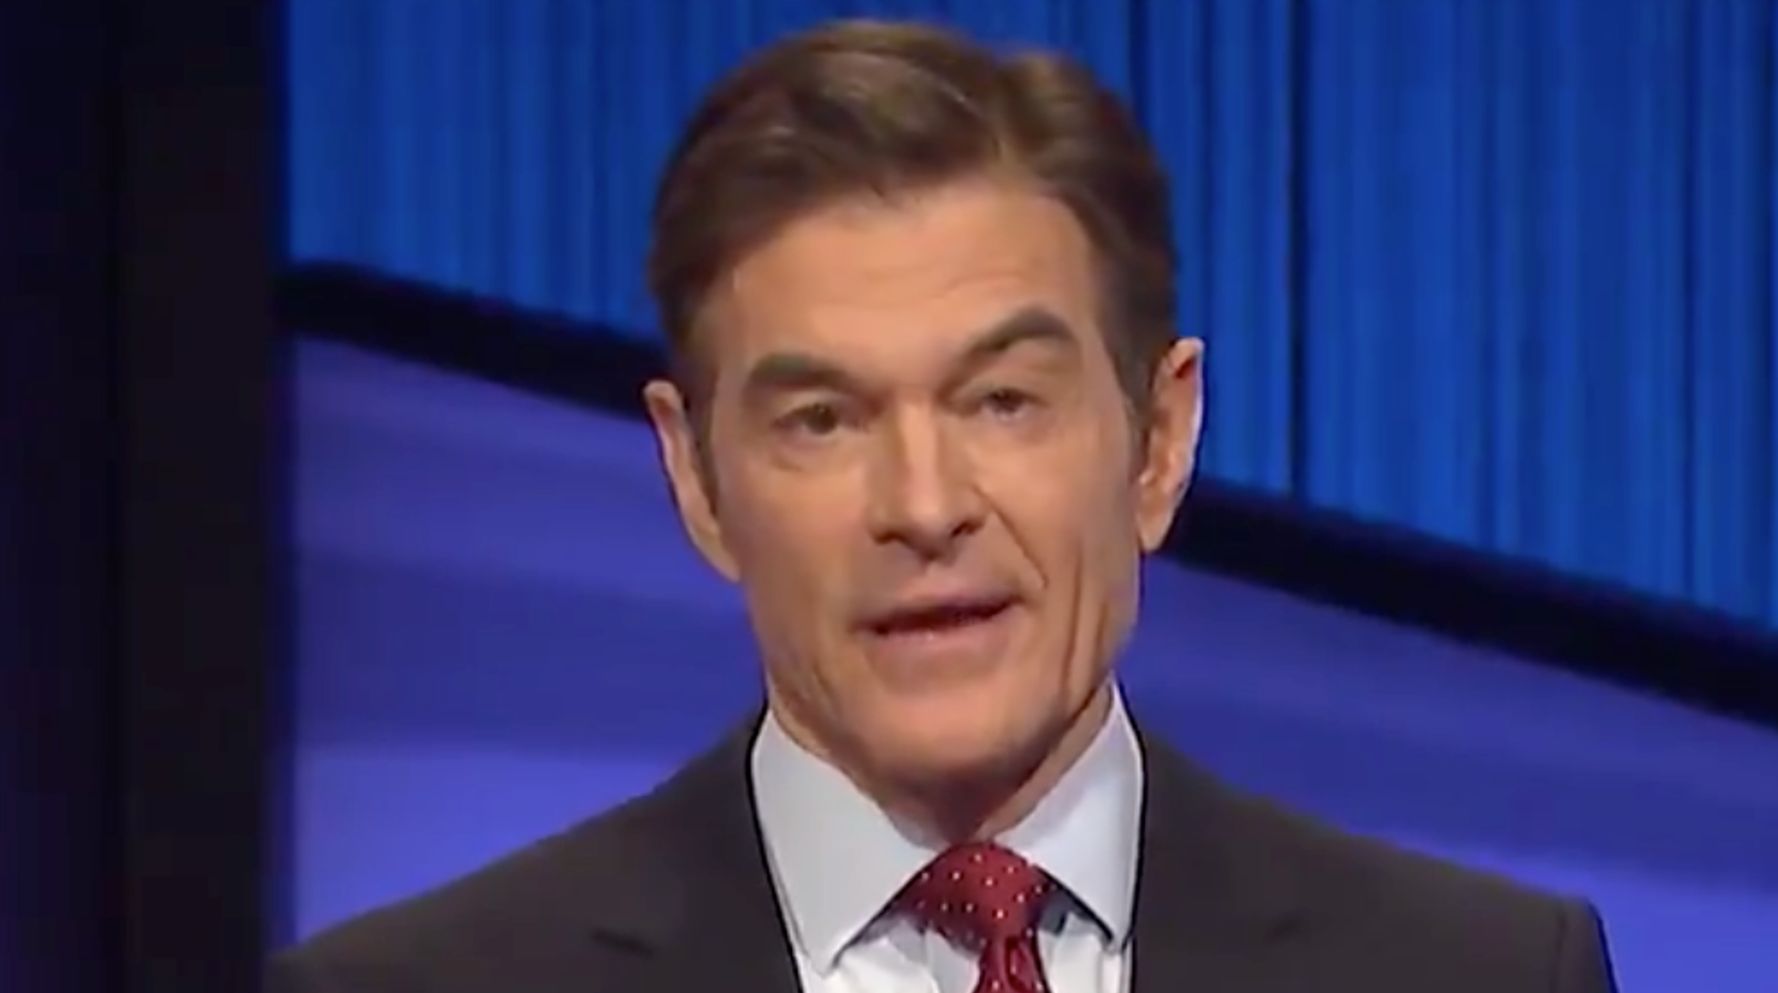 ‘Jeopardy!’  From Dr. Oz Fragmented limit on social media: he is ‘dangerous’